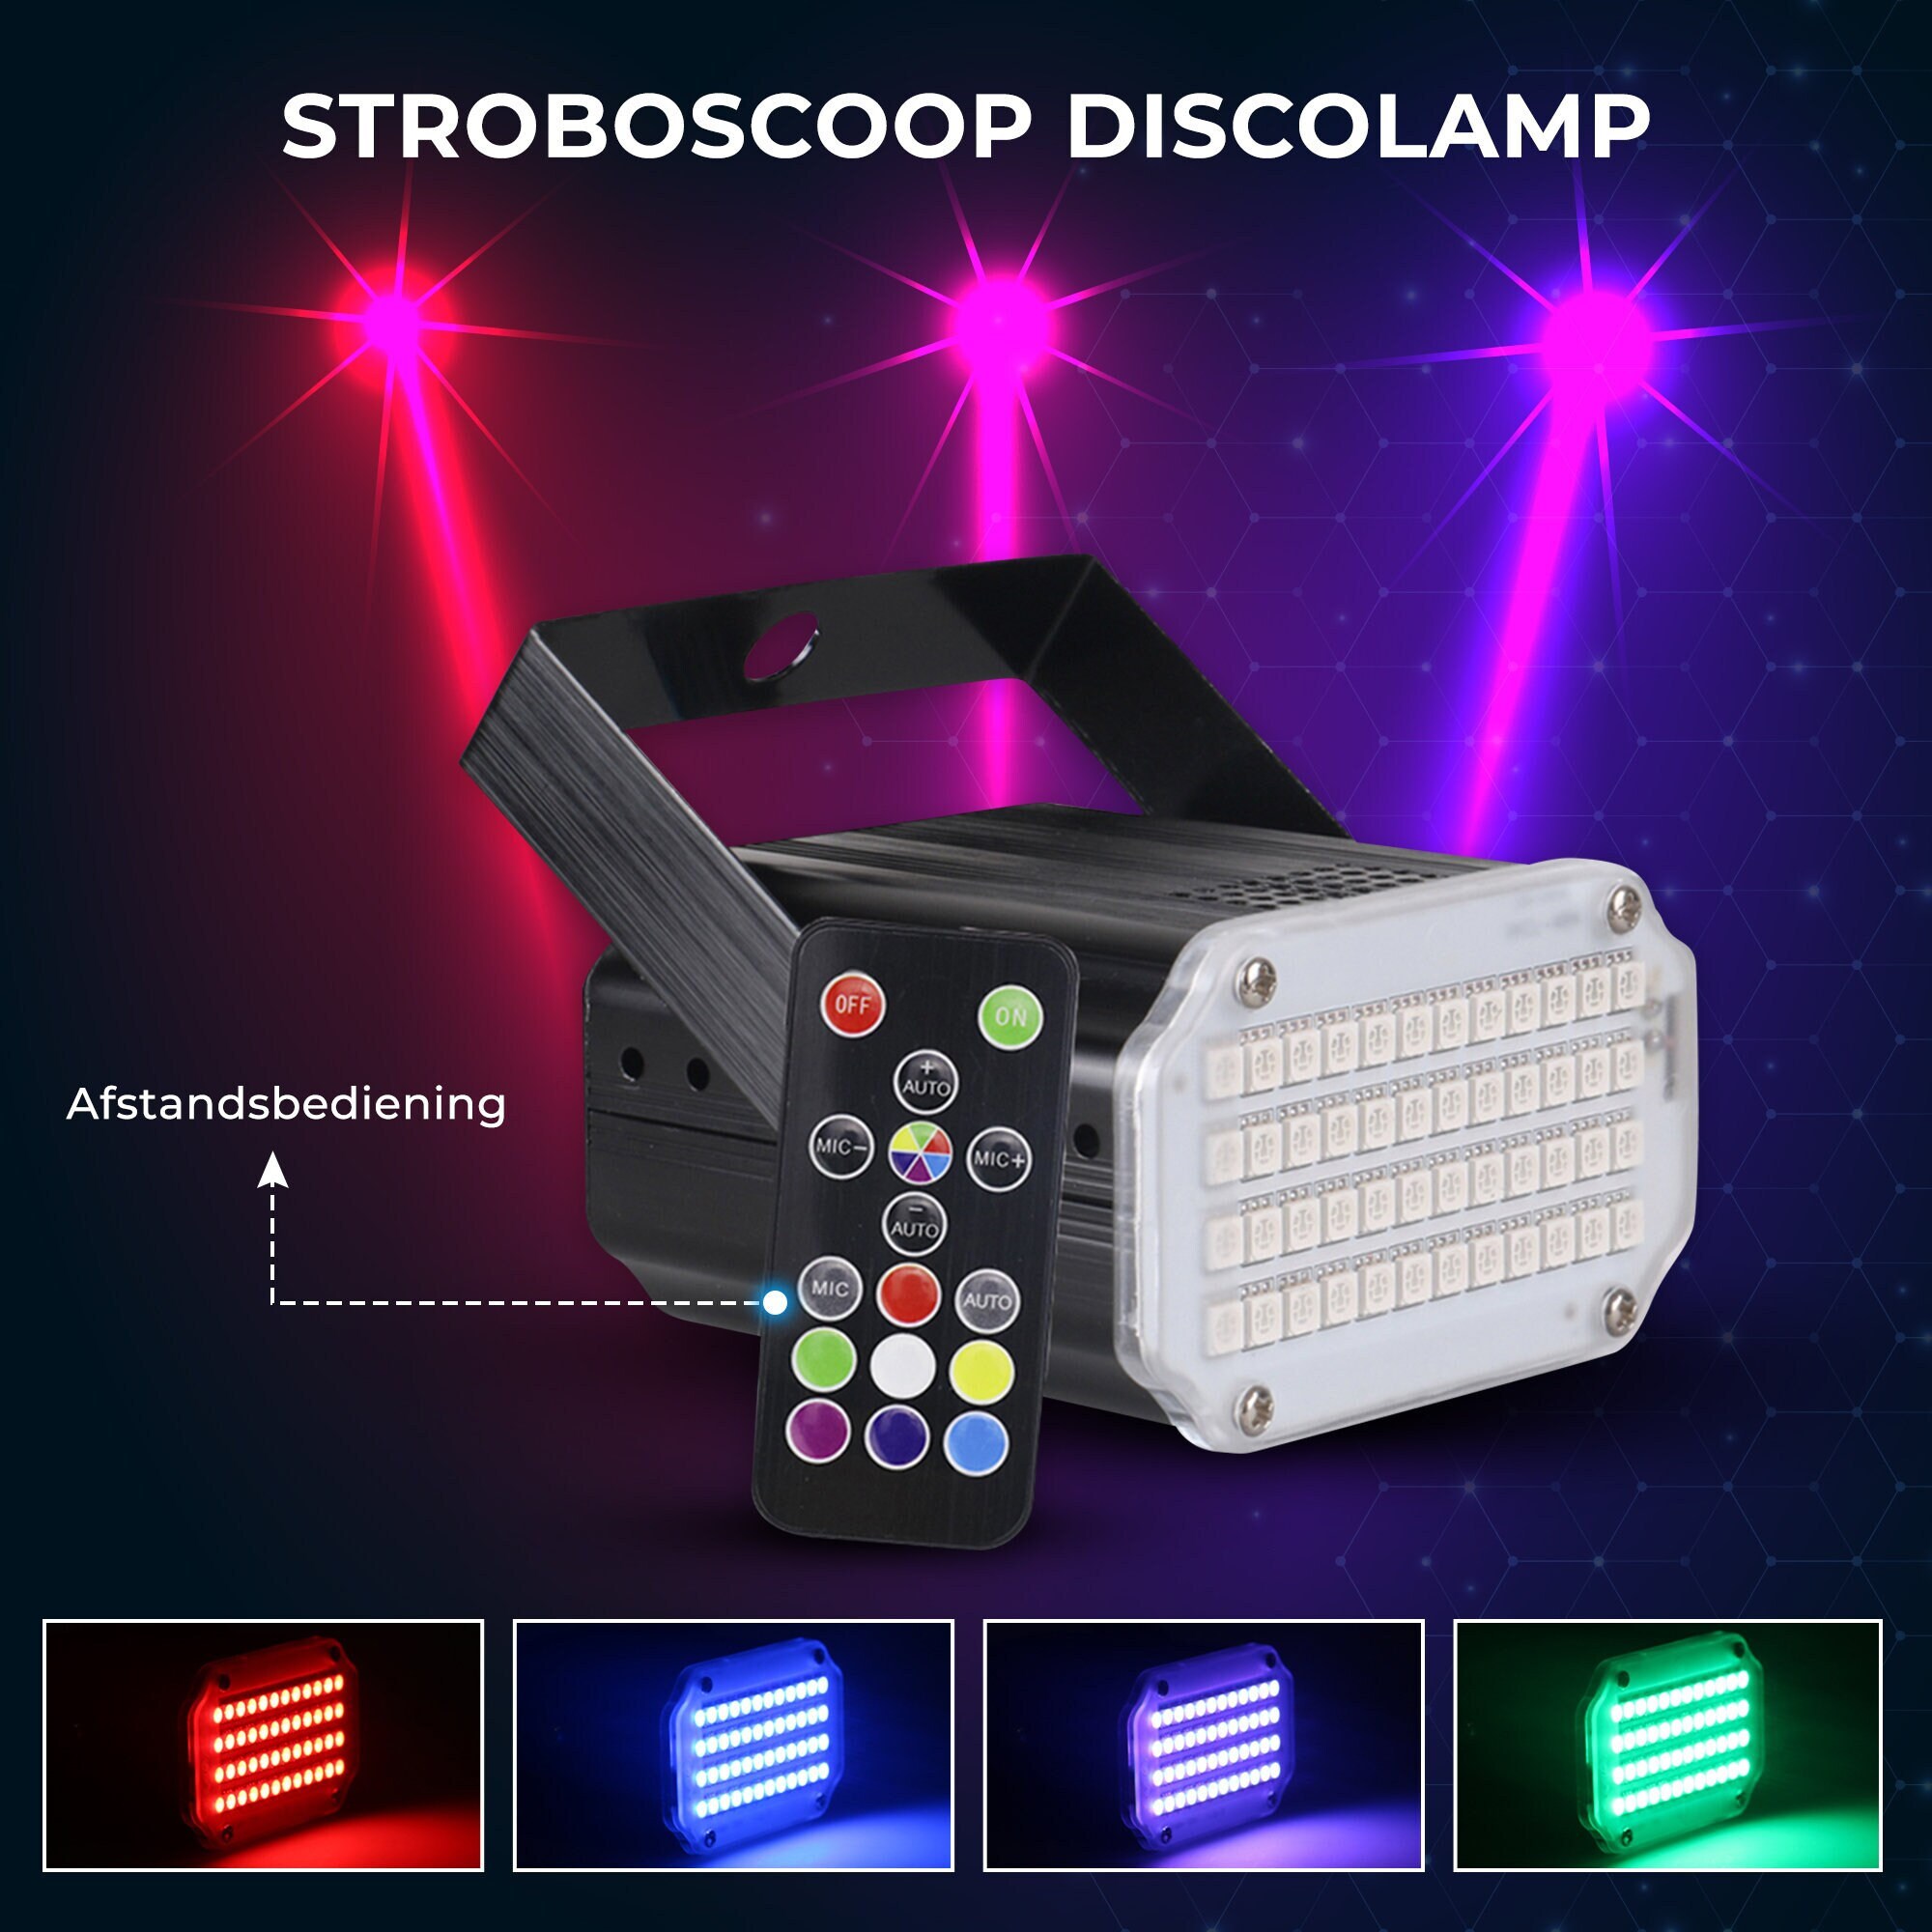 LED Auto USB Discobal RGB Mini Party Verlichting - Discolamp Sfeer